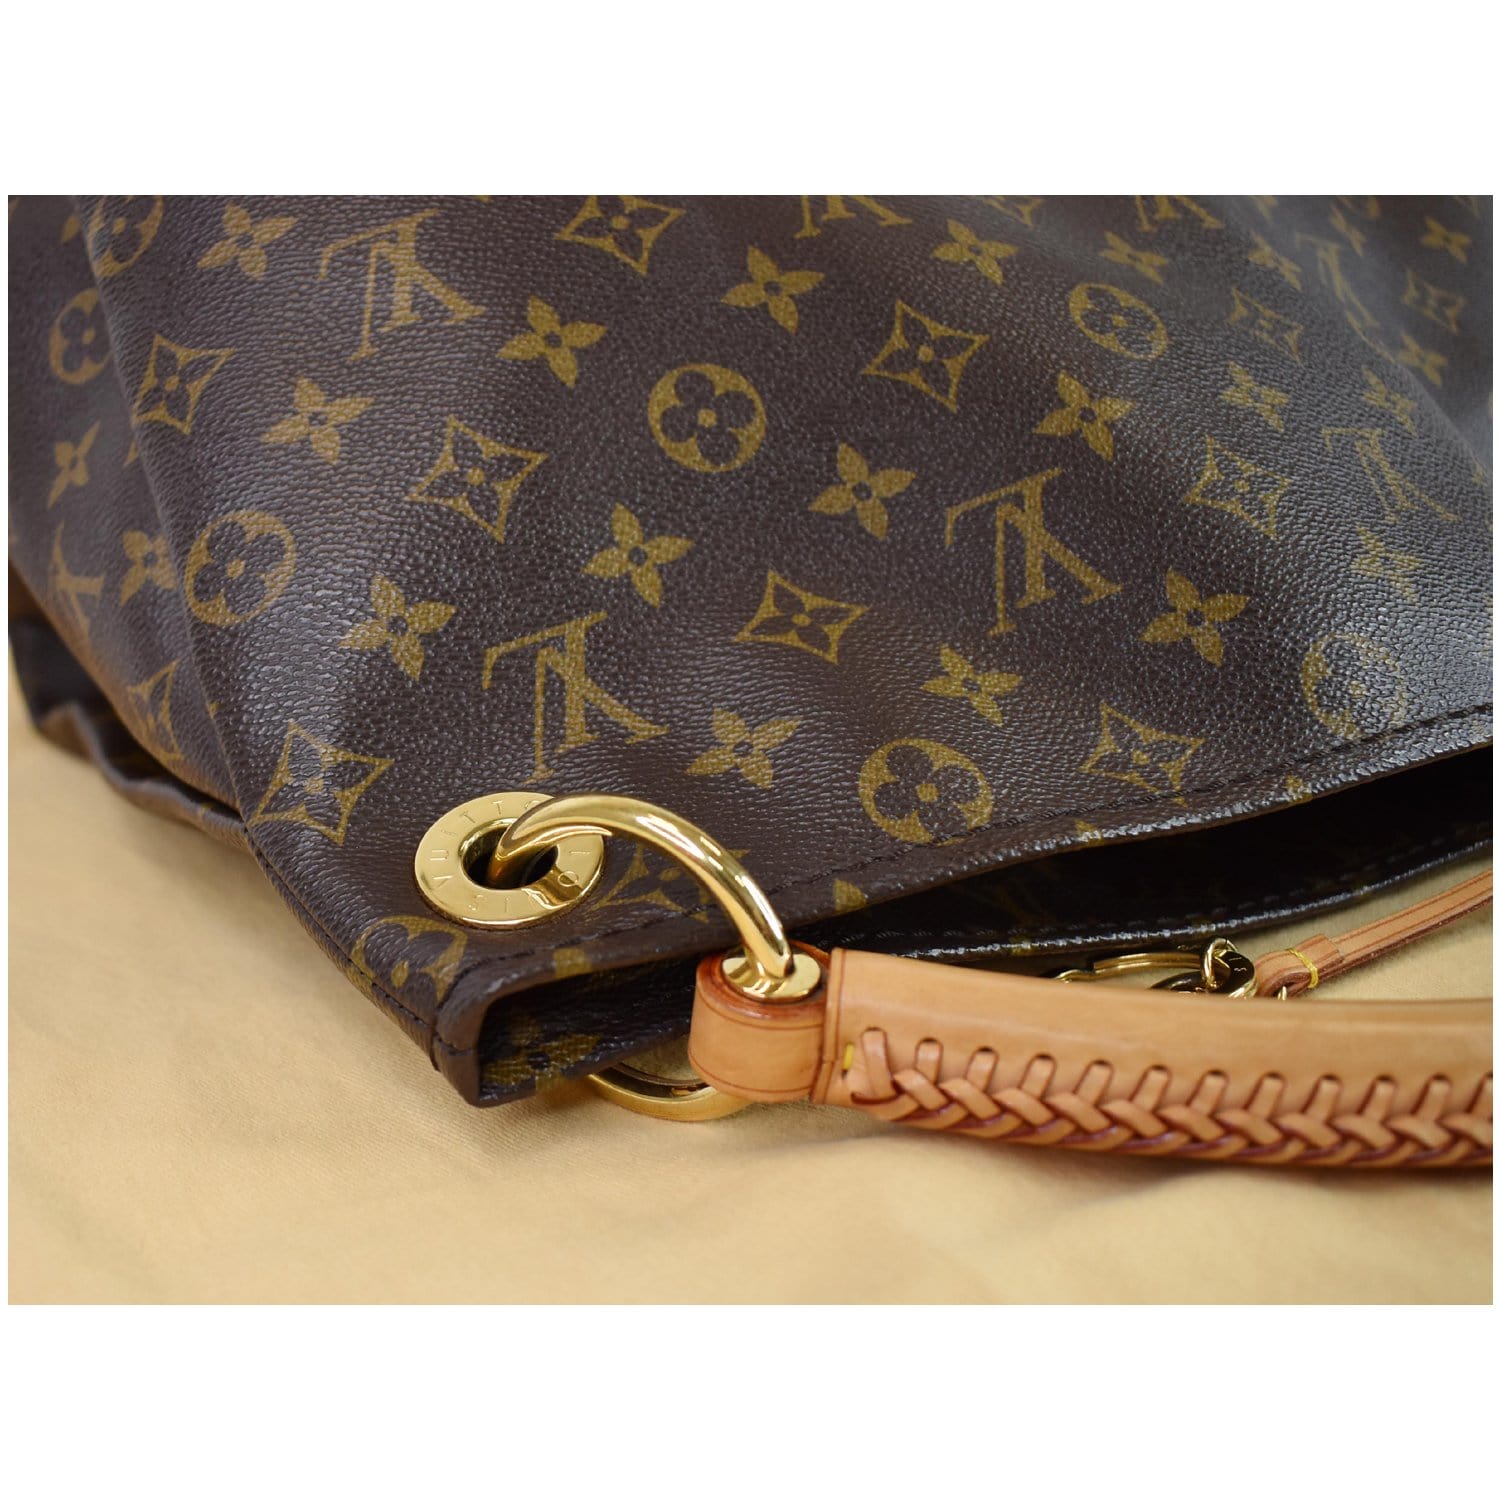 Louis Vuitton 2011 pre-owned Sully MM Shoulder Bag - Farfetch